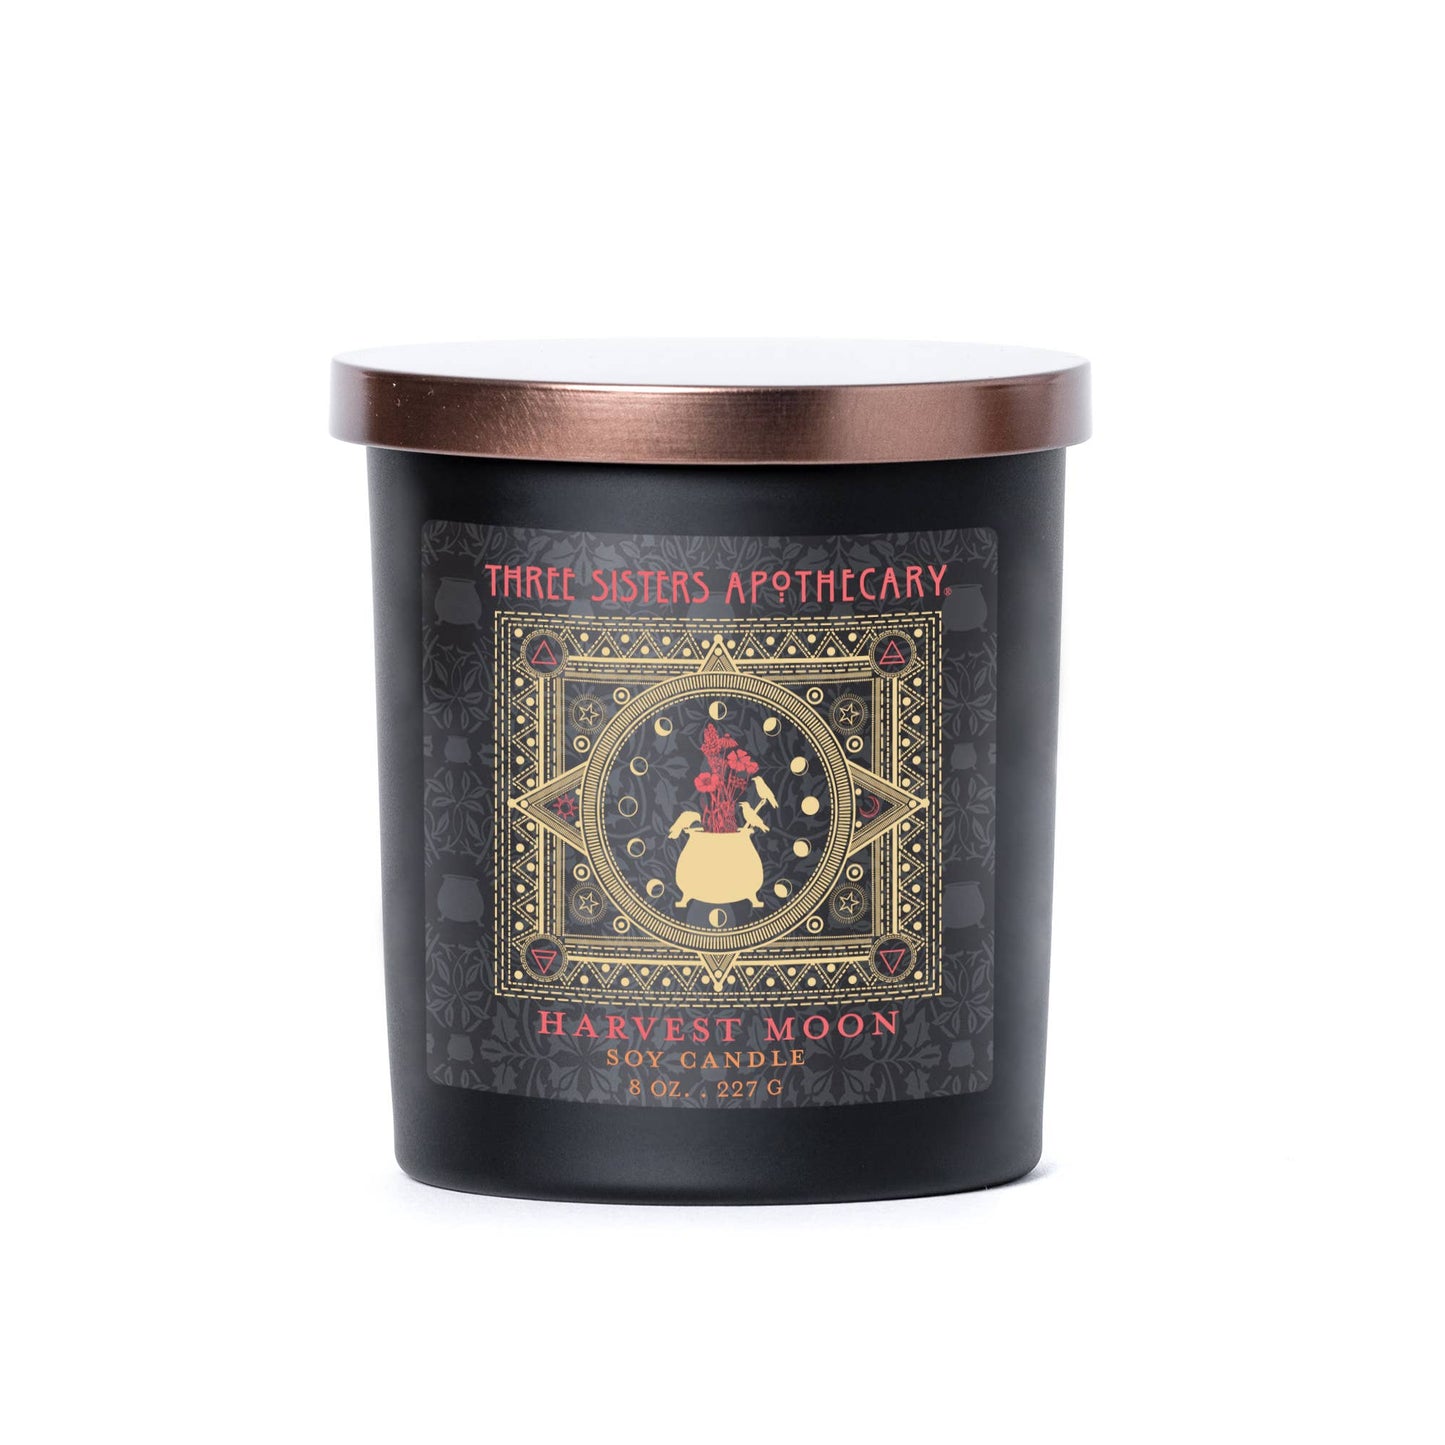 Candle: Harvest Moon by Three Sisters Apothecary